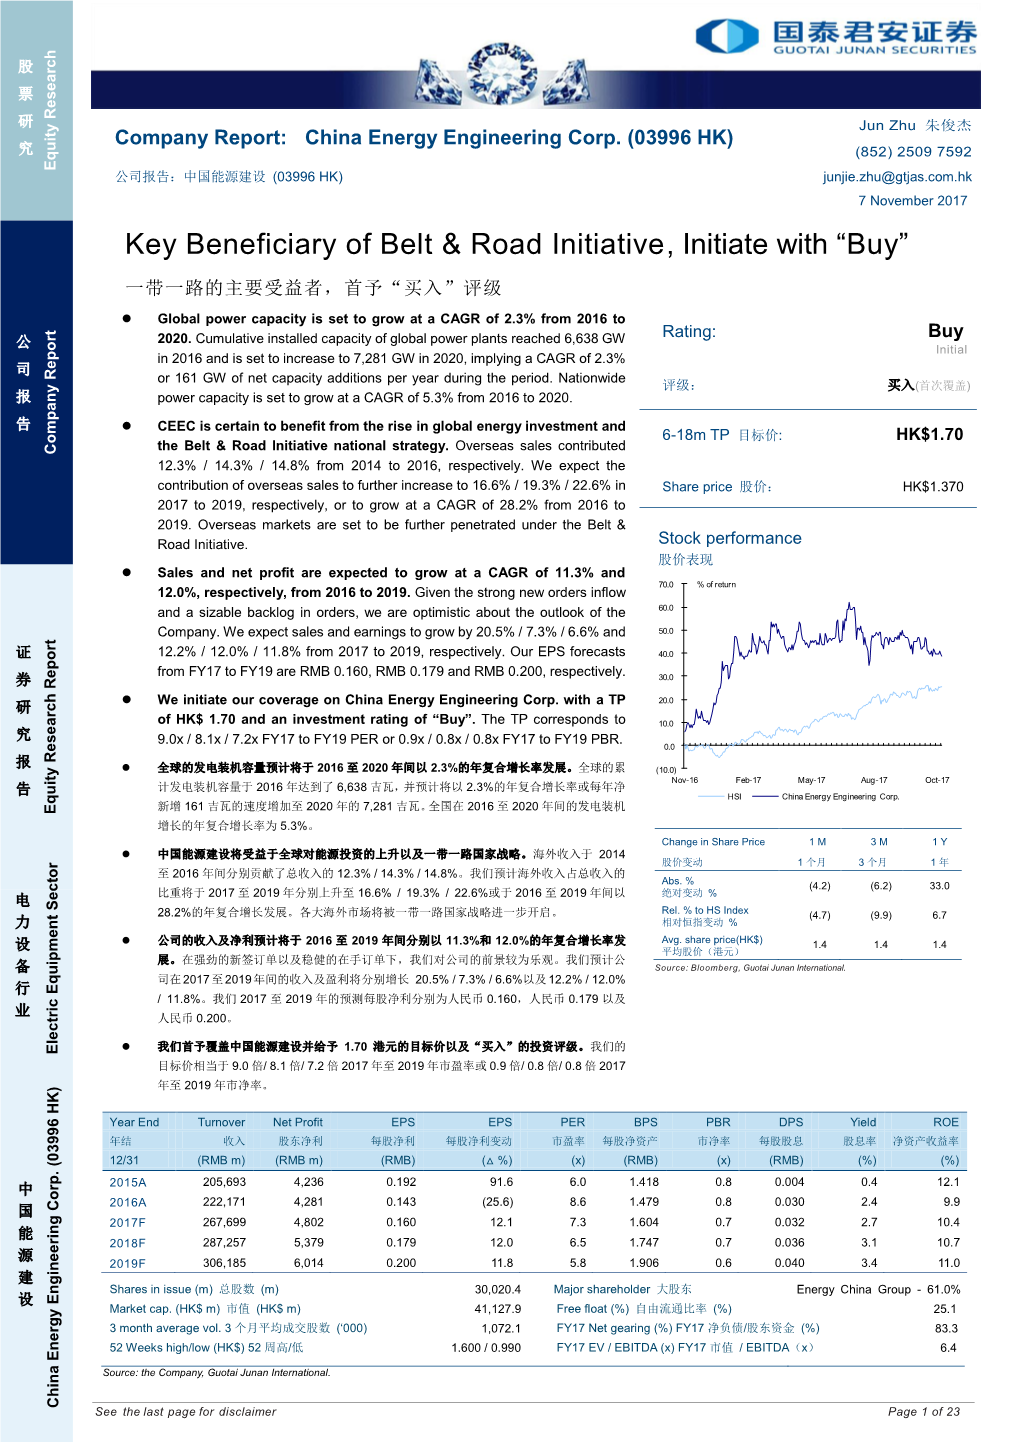 Key Beneficiary of Belt & Road Initiative, Initiate with “Buy”